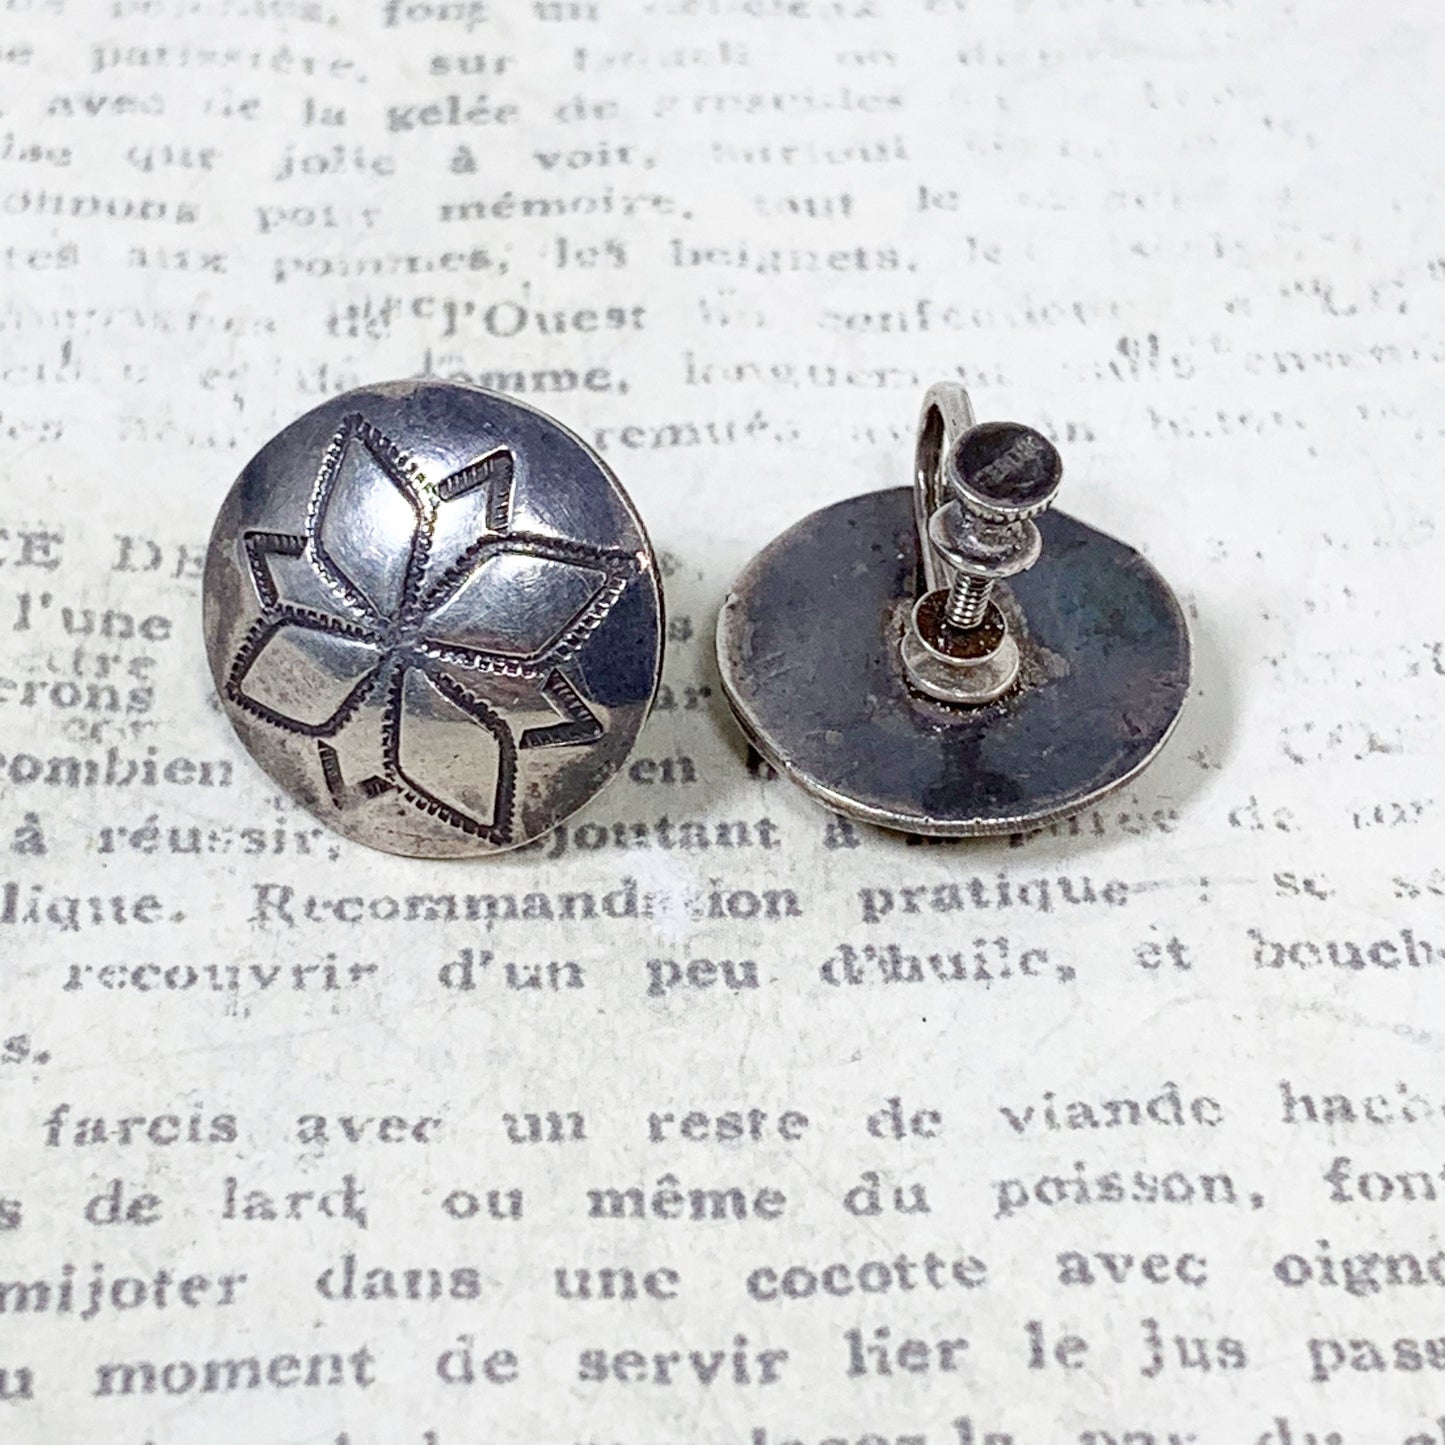 Vintage Silver Concho Stamped Earrings | Southwest Silver Conchos | Morning Star Screwback Earrings